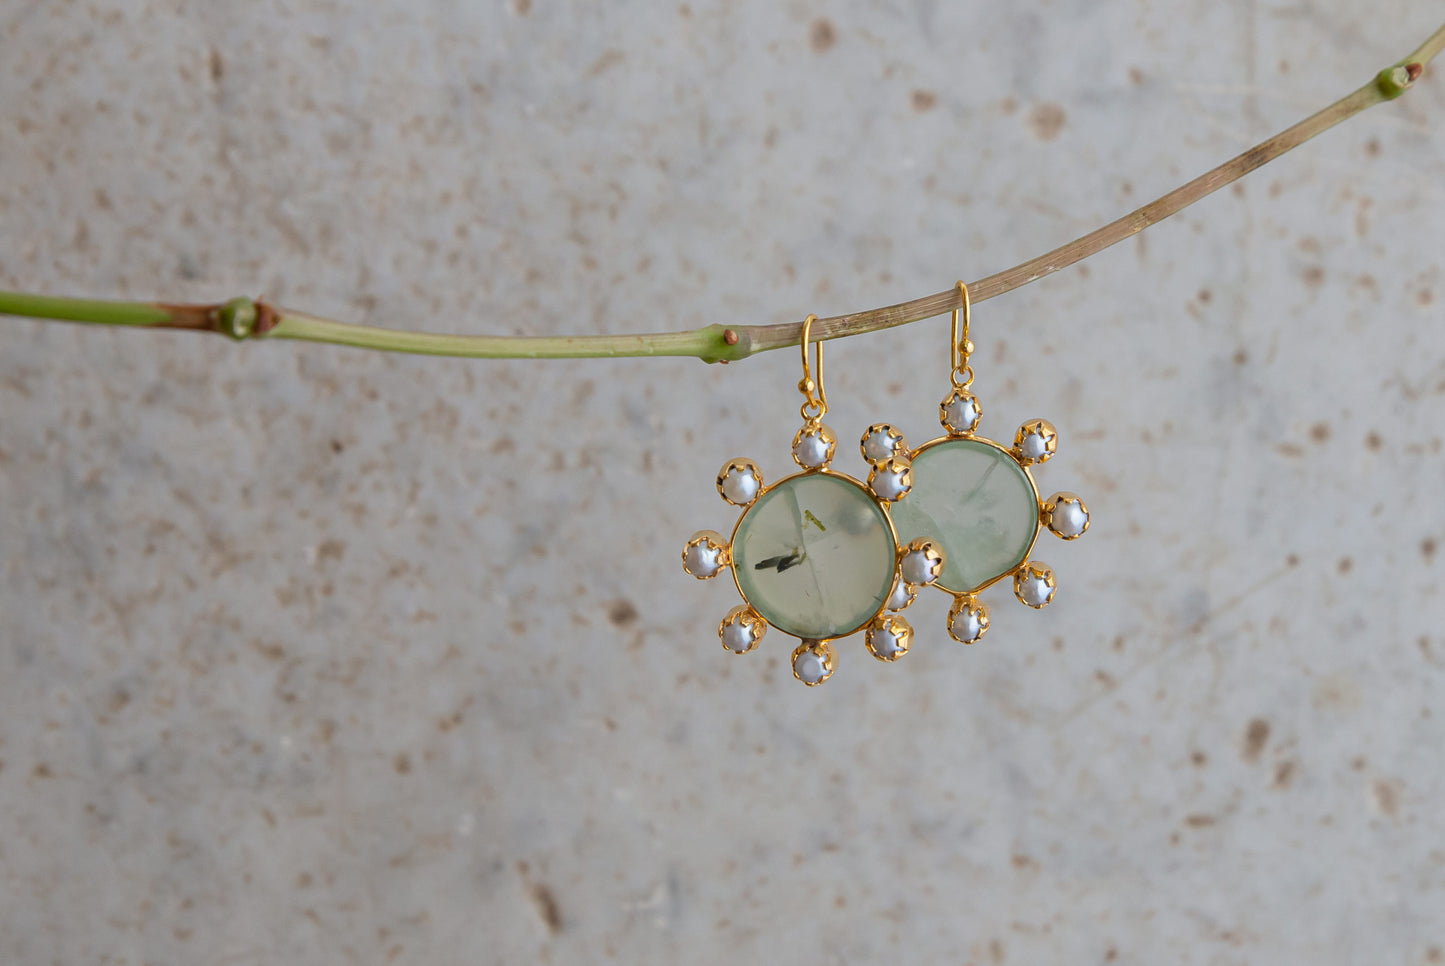 ROUND EARRINGS WITH PREHNITE AND PEARLS